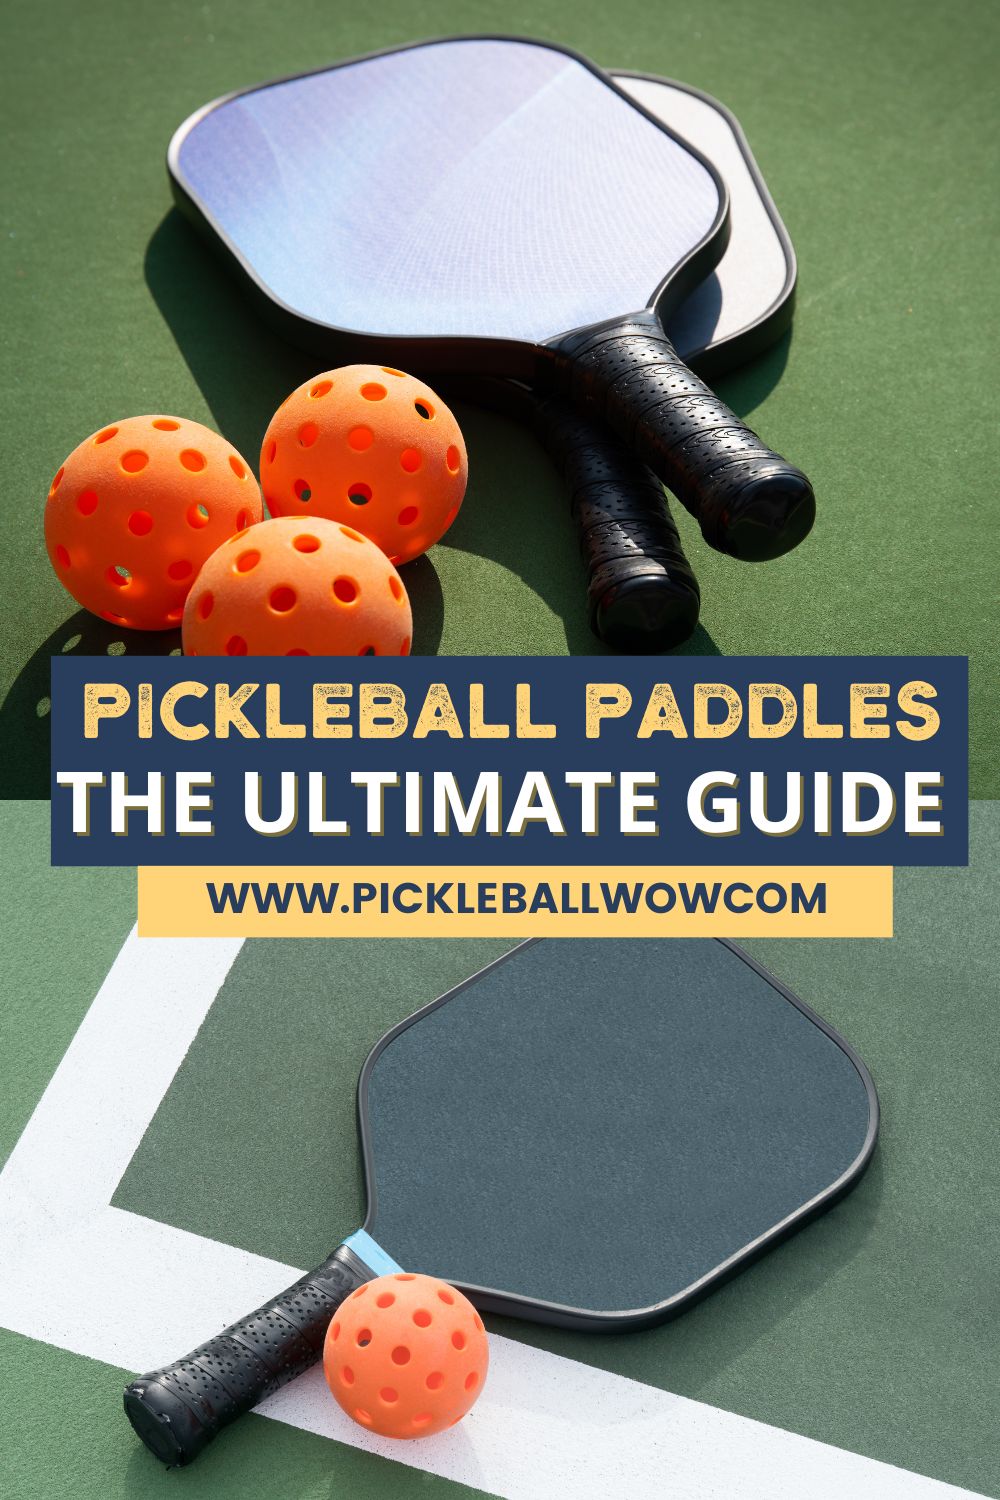 Pickelball paddles and pickleball balls sitting on a pickleball court